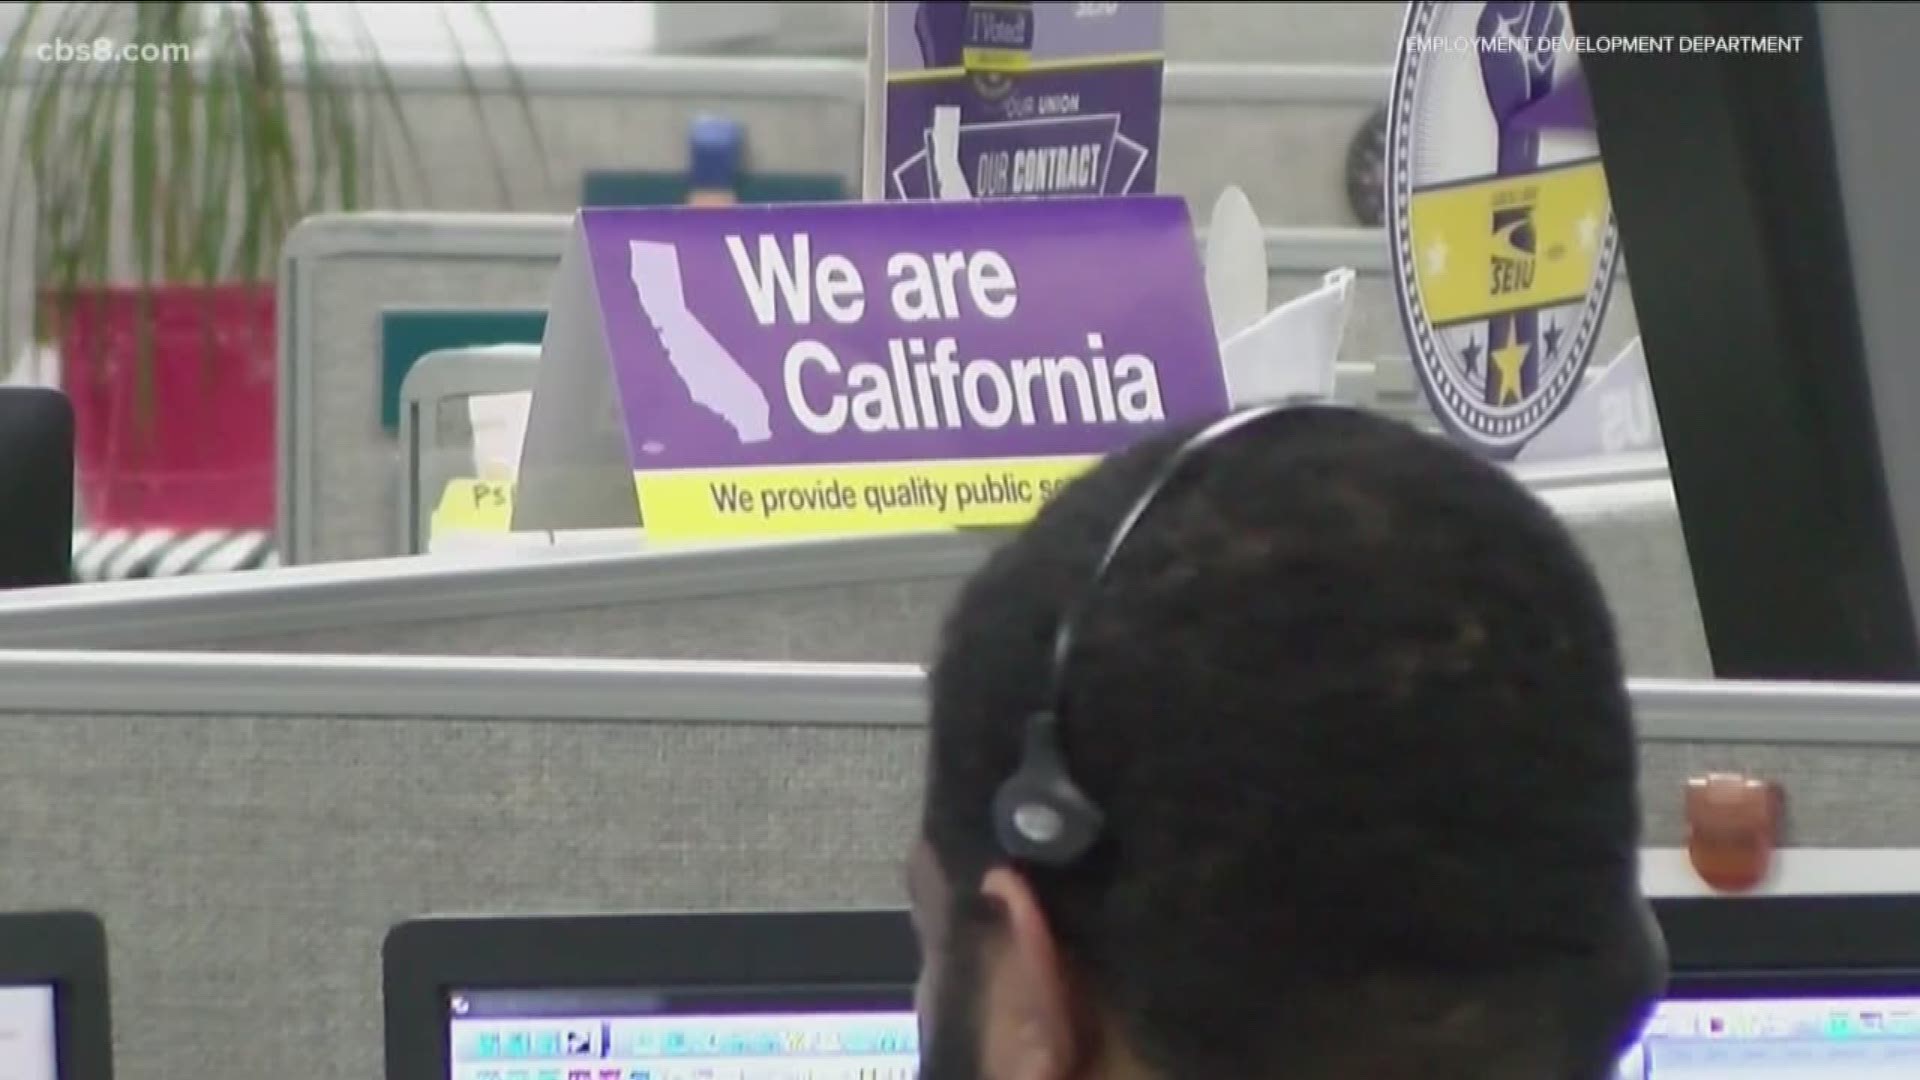 Some San Diegans said the process of getting unemployment benefits has cost them hours of their time.